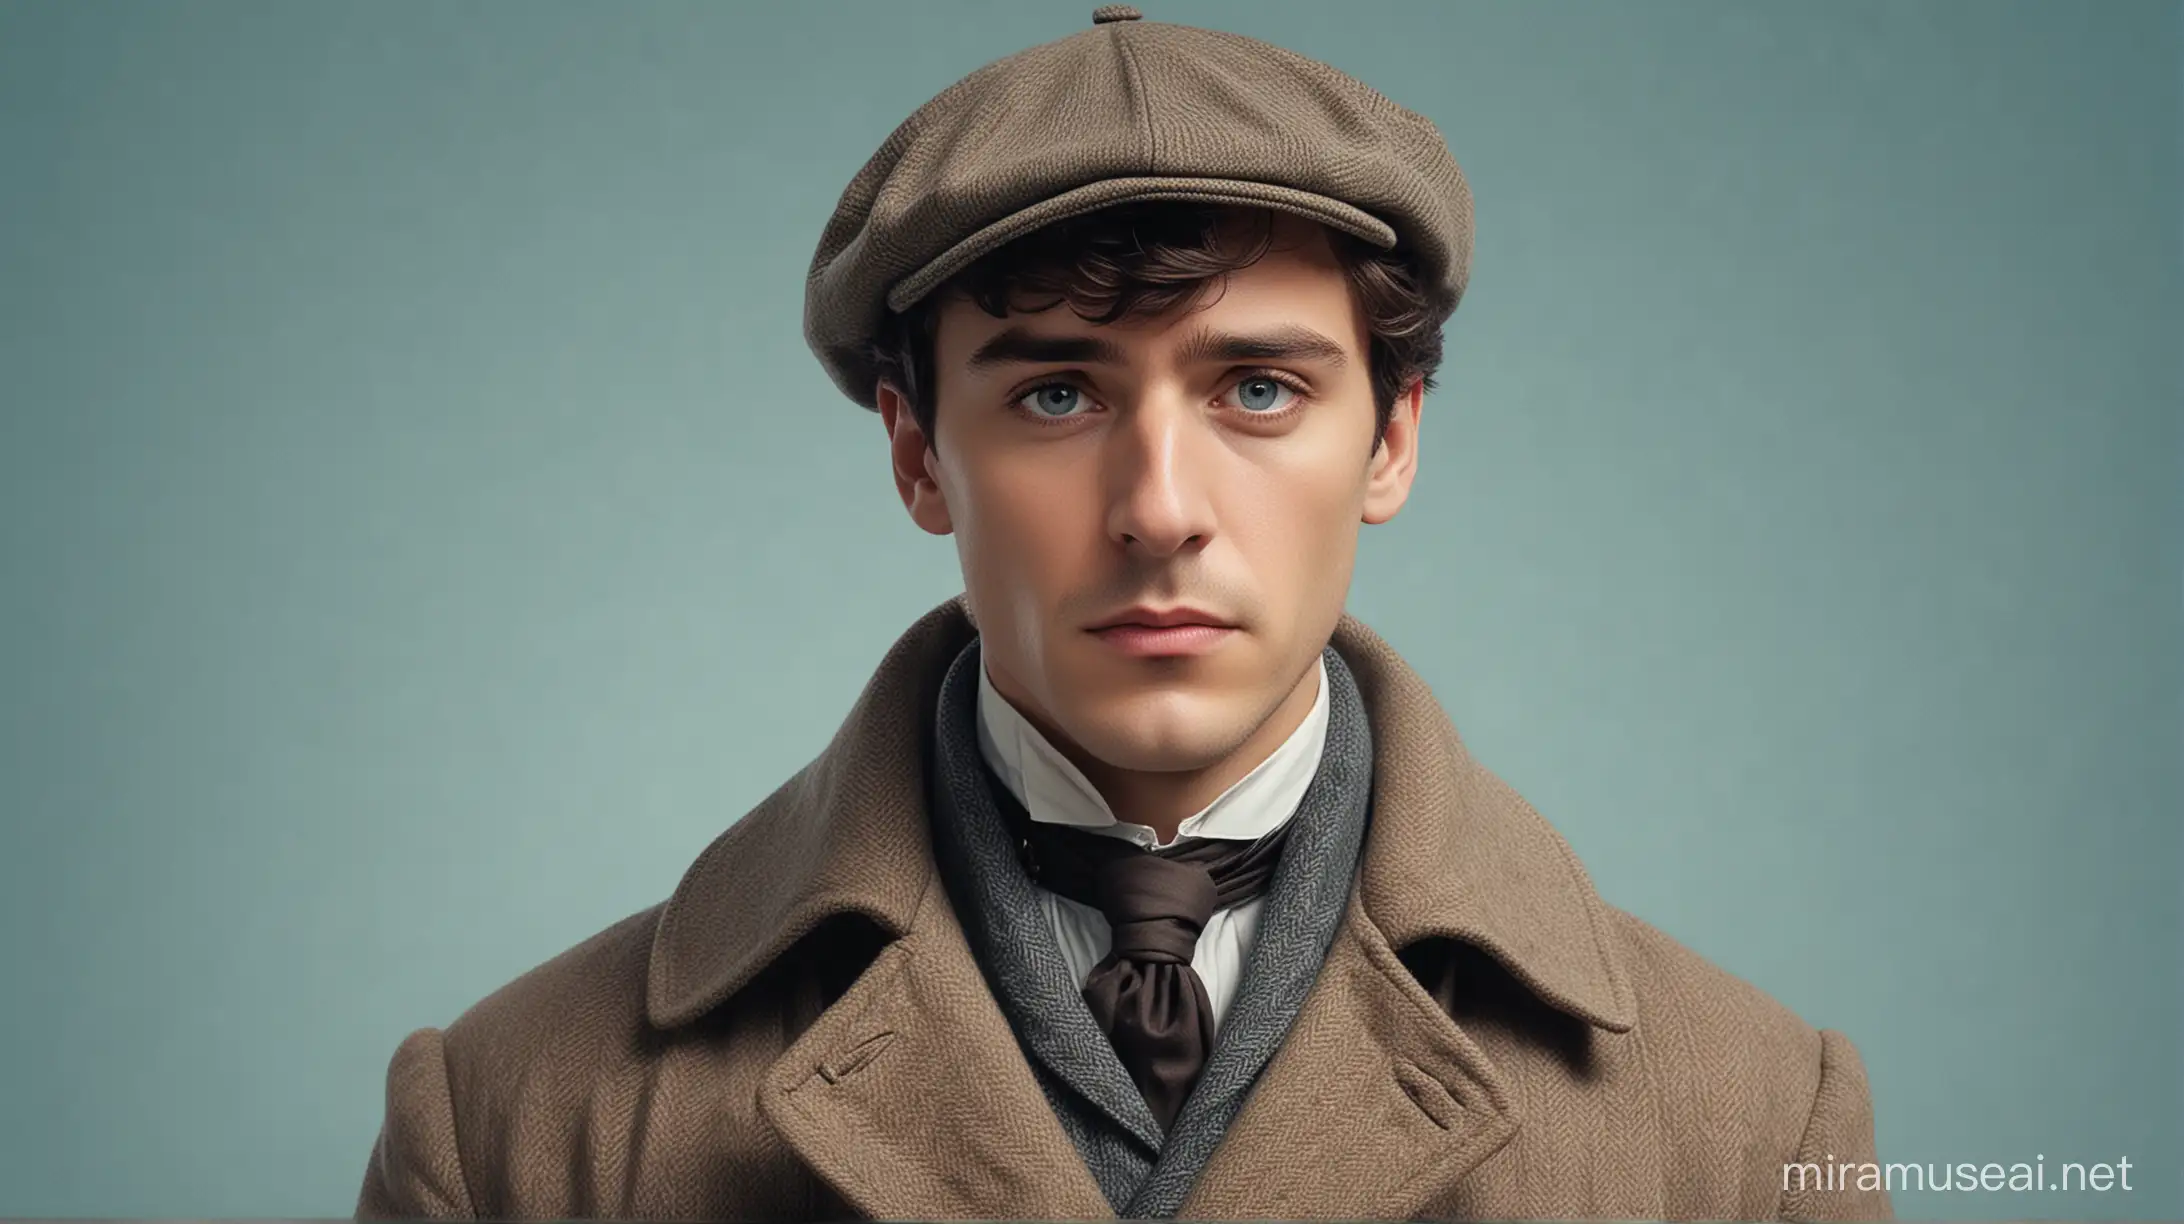 Teen Sherlock Holmes in Classic Detective Attire Solving a Mystery